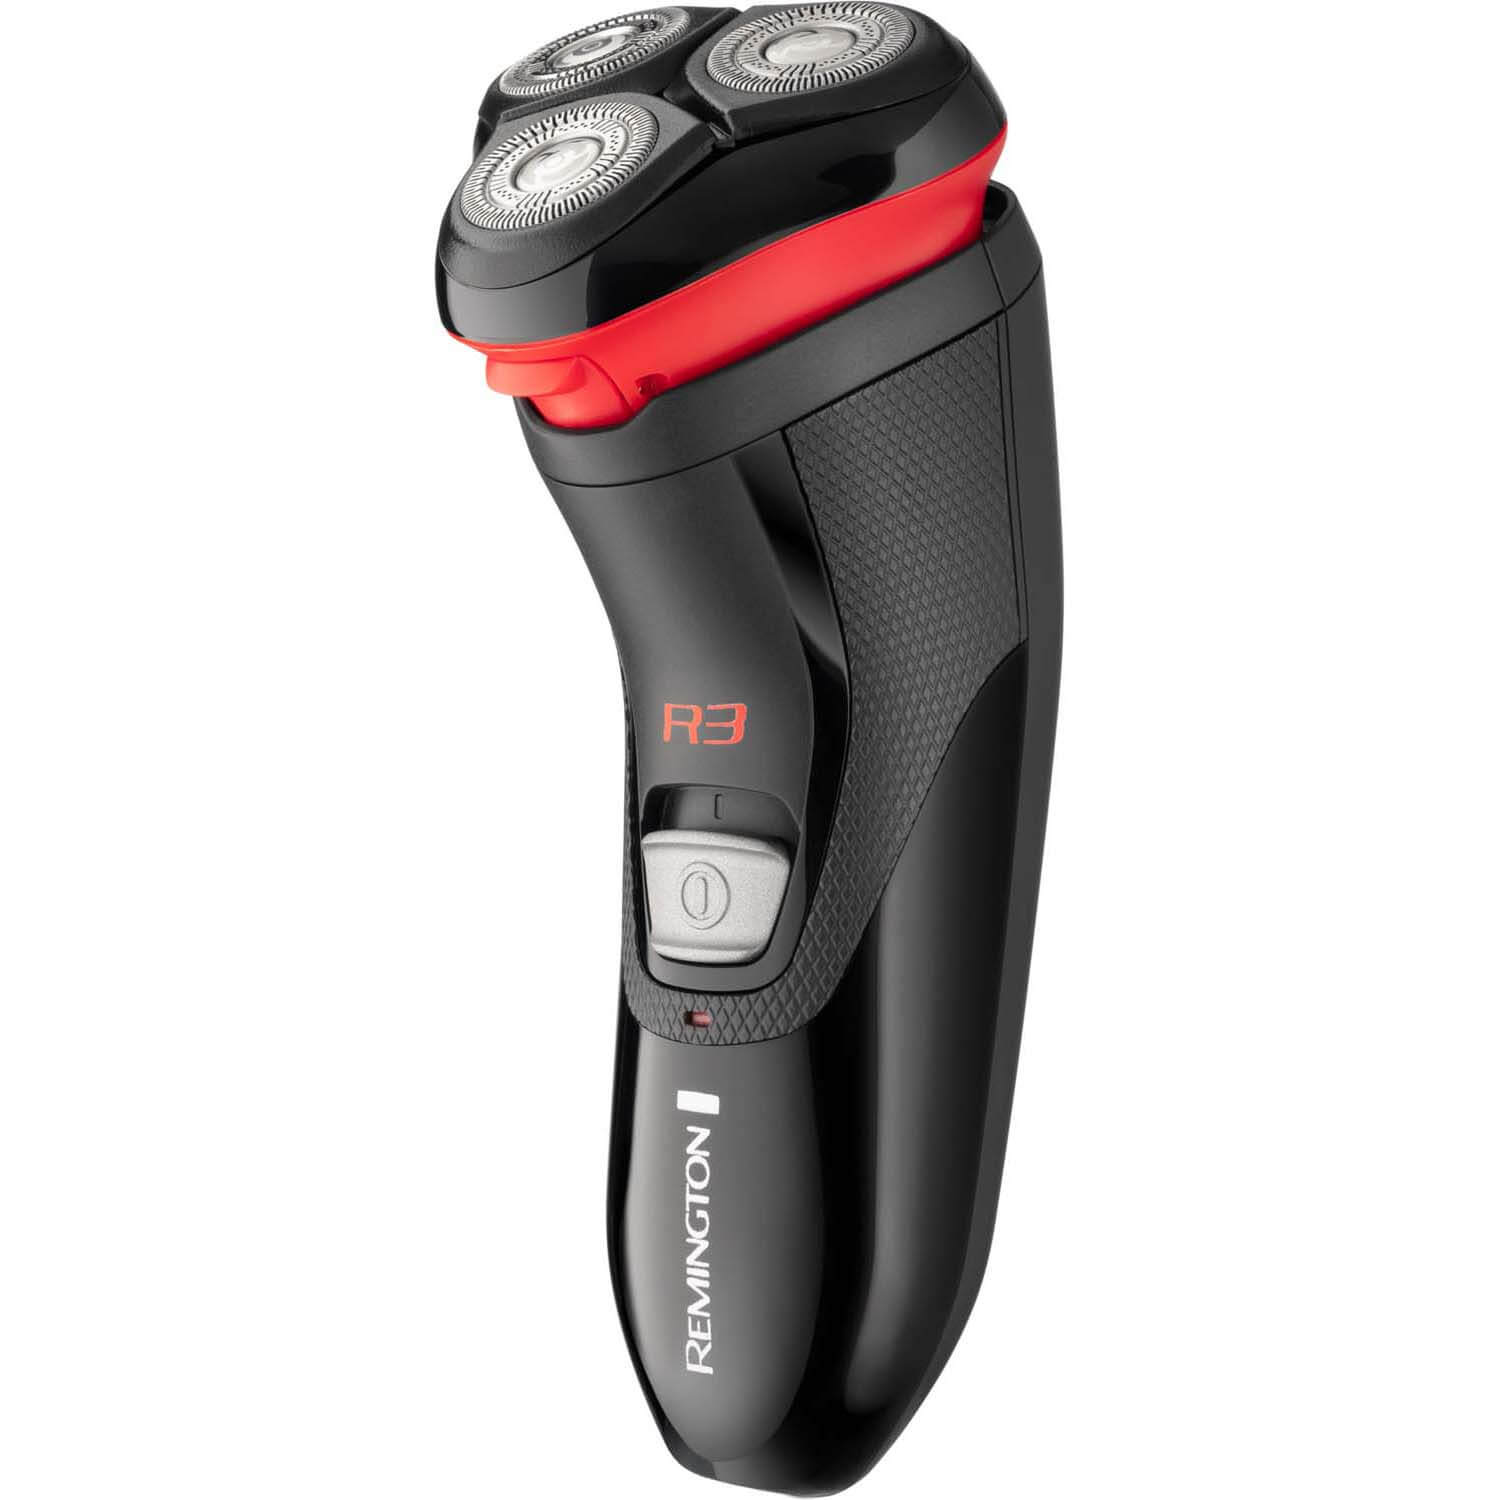 Remington R3000 Style Series Rotary Shaver 1 Shaws Department Stores